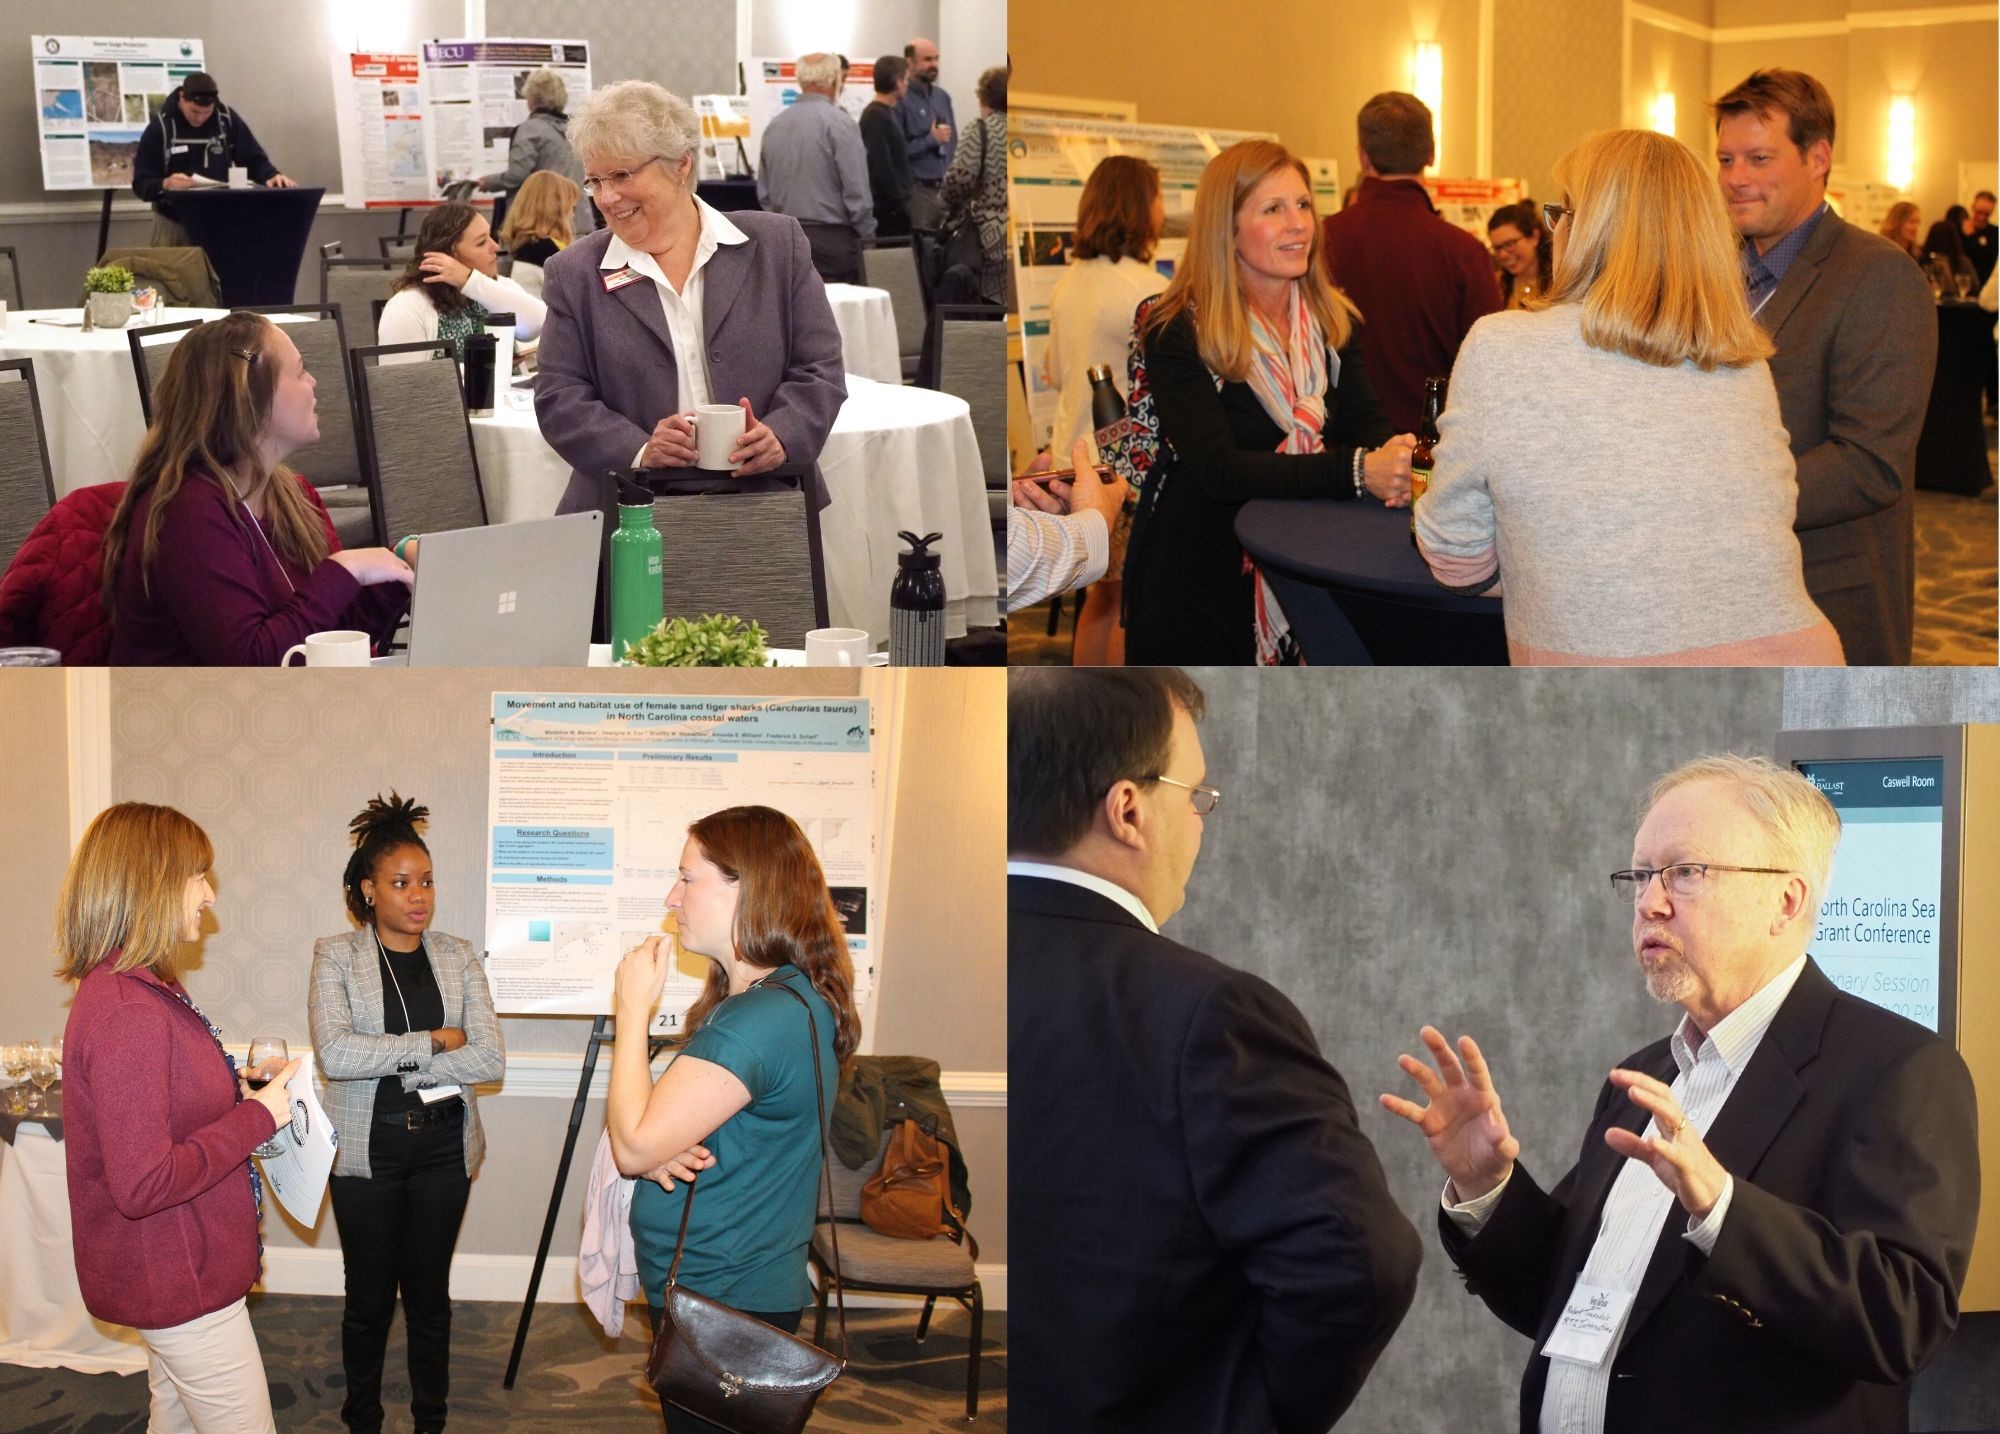 Day one of the Coastal Conference offered many opportunities for networking and sharing of ideas.